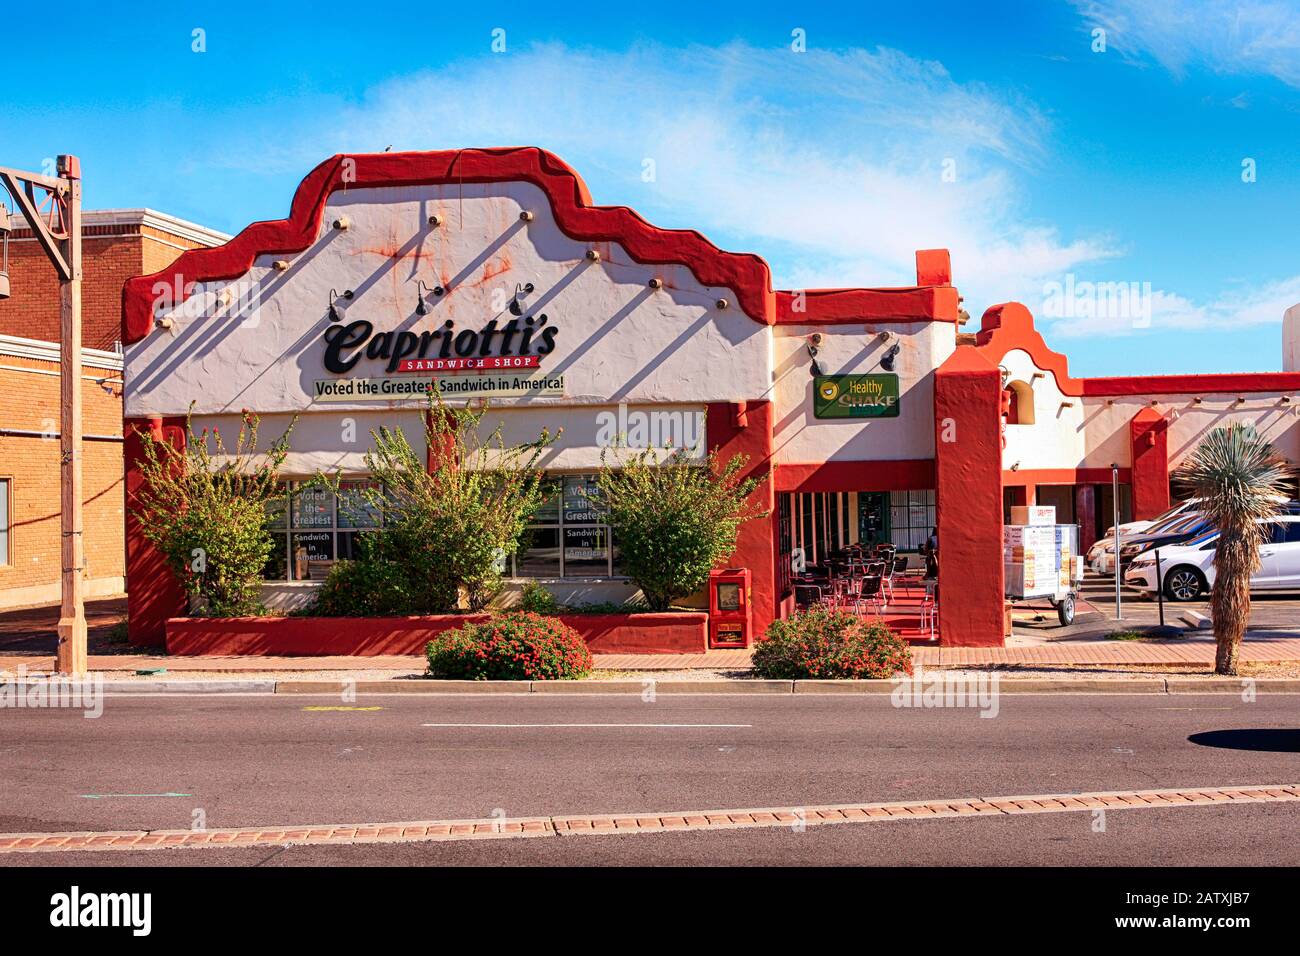 Capriotti's Sandwich shop - voted the greatest in America - in Scottsdale AZ Stock Photo